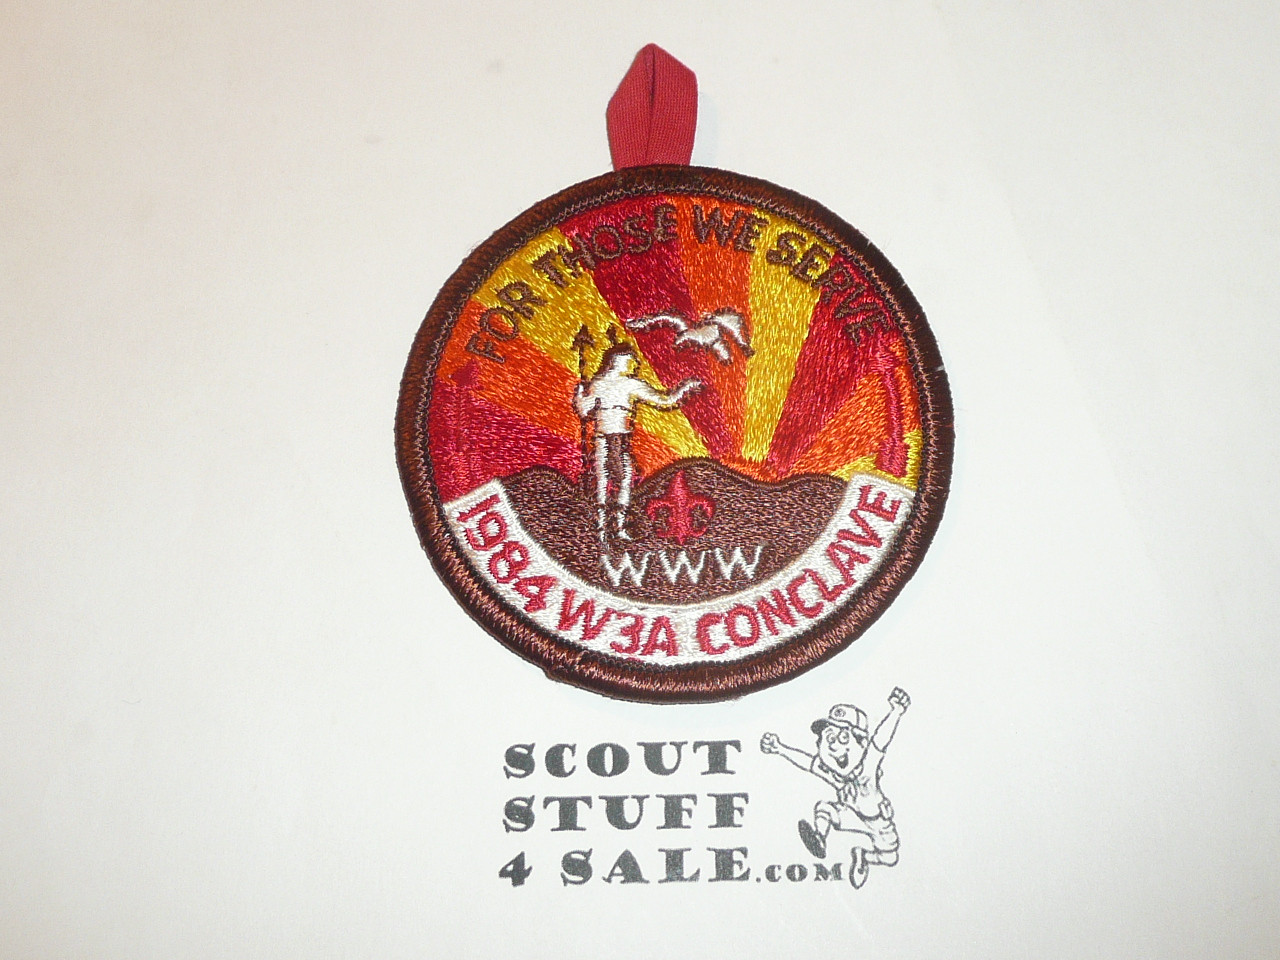 Section W3A 1984 O.A. Conclave Patch - Scout